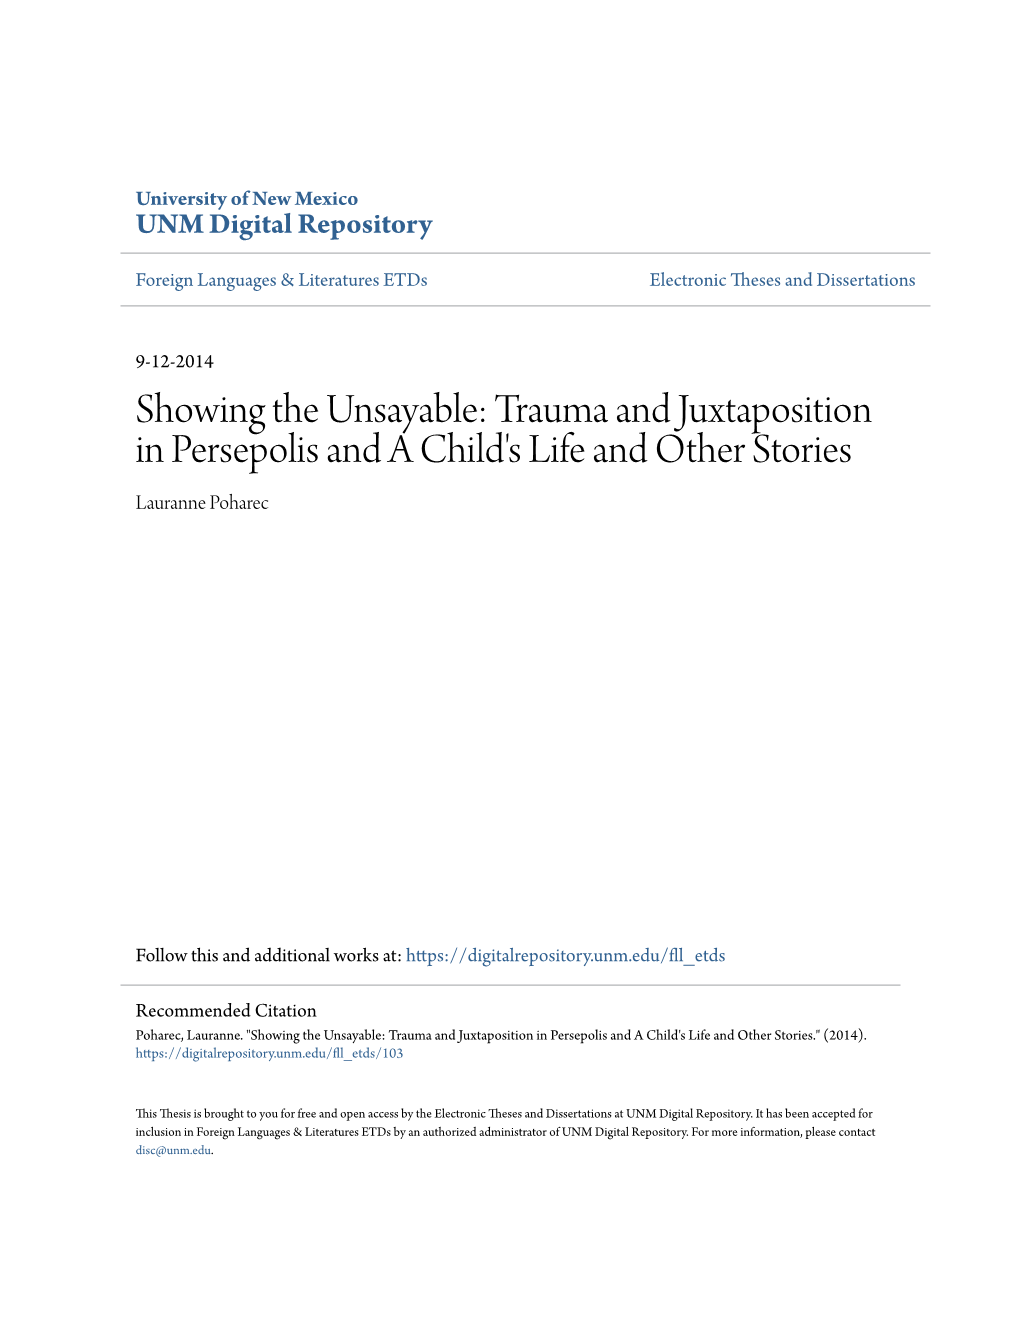 Trauma and Juxtaposition in Persepolis and a Child's Life and Other Stories Lauranne Poharec